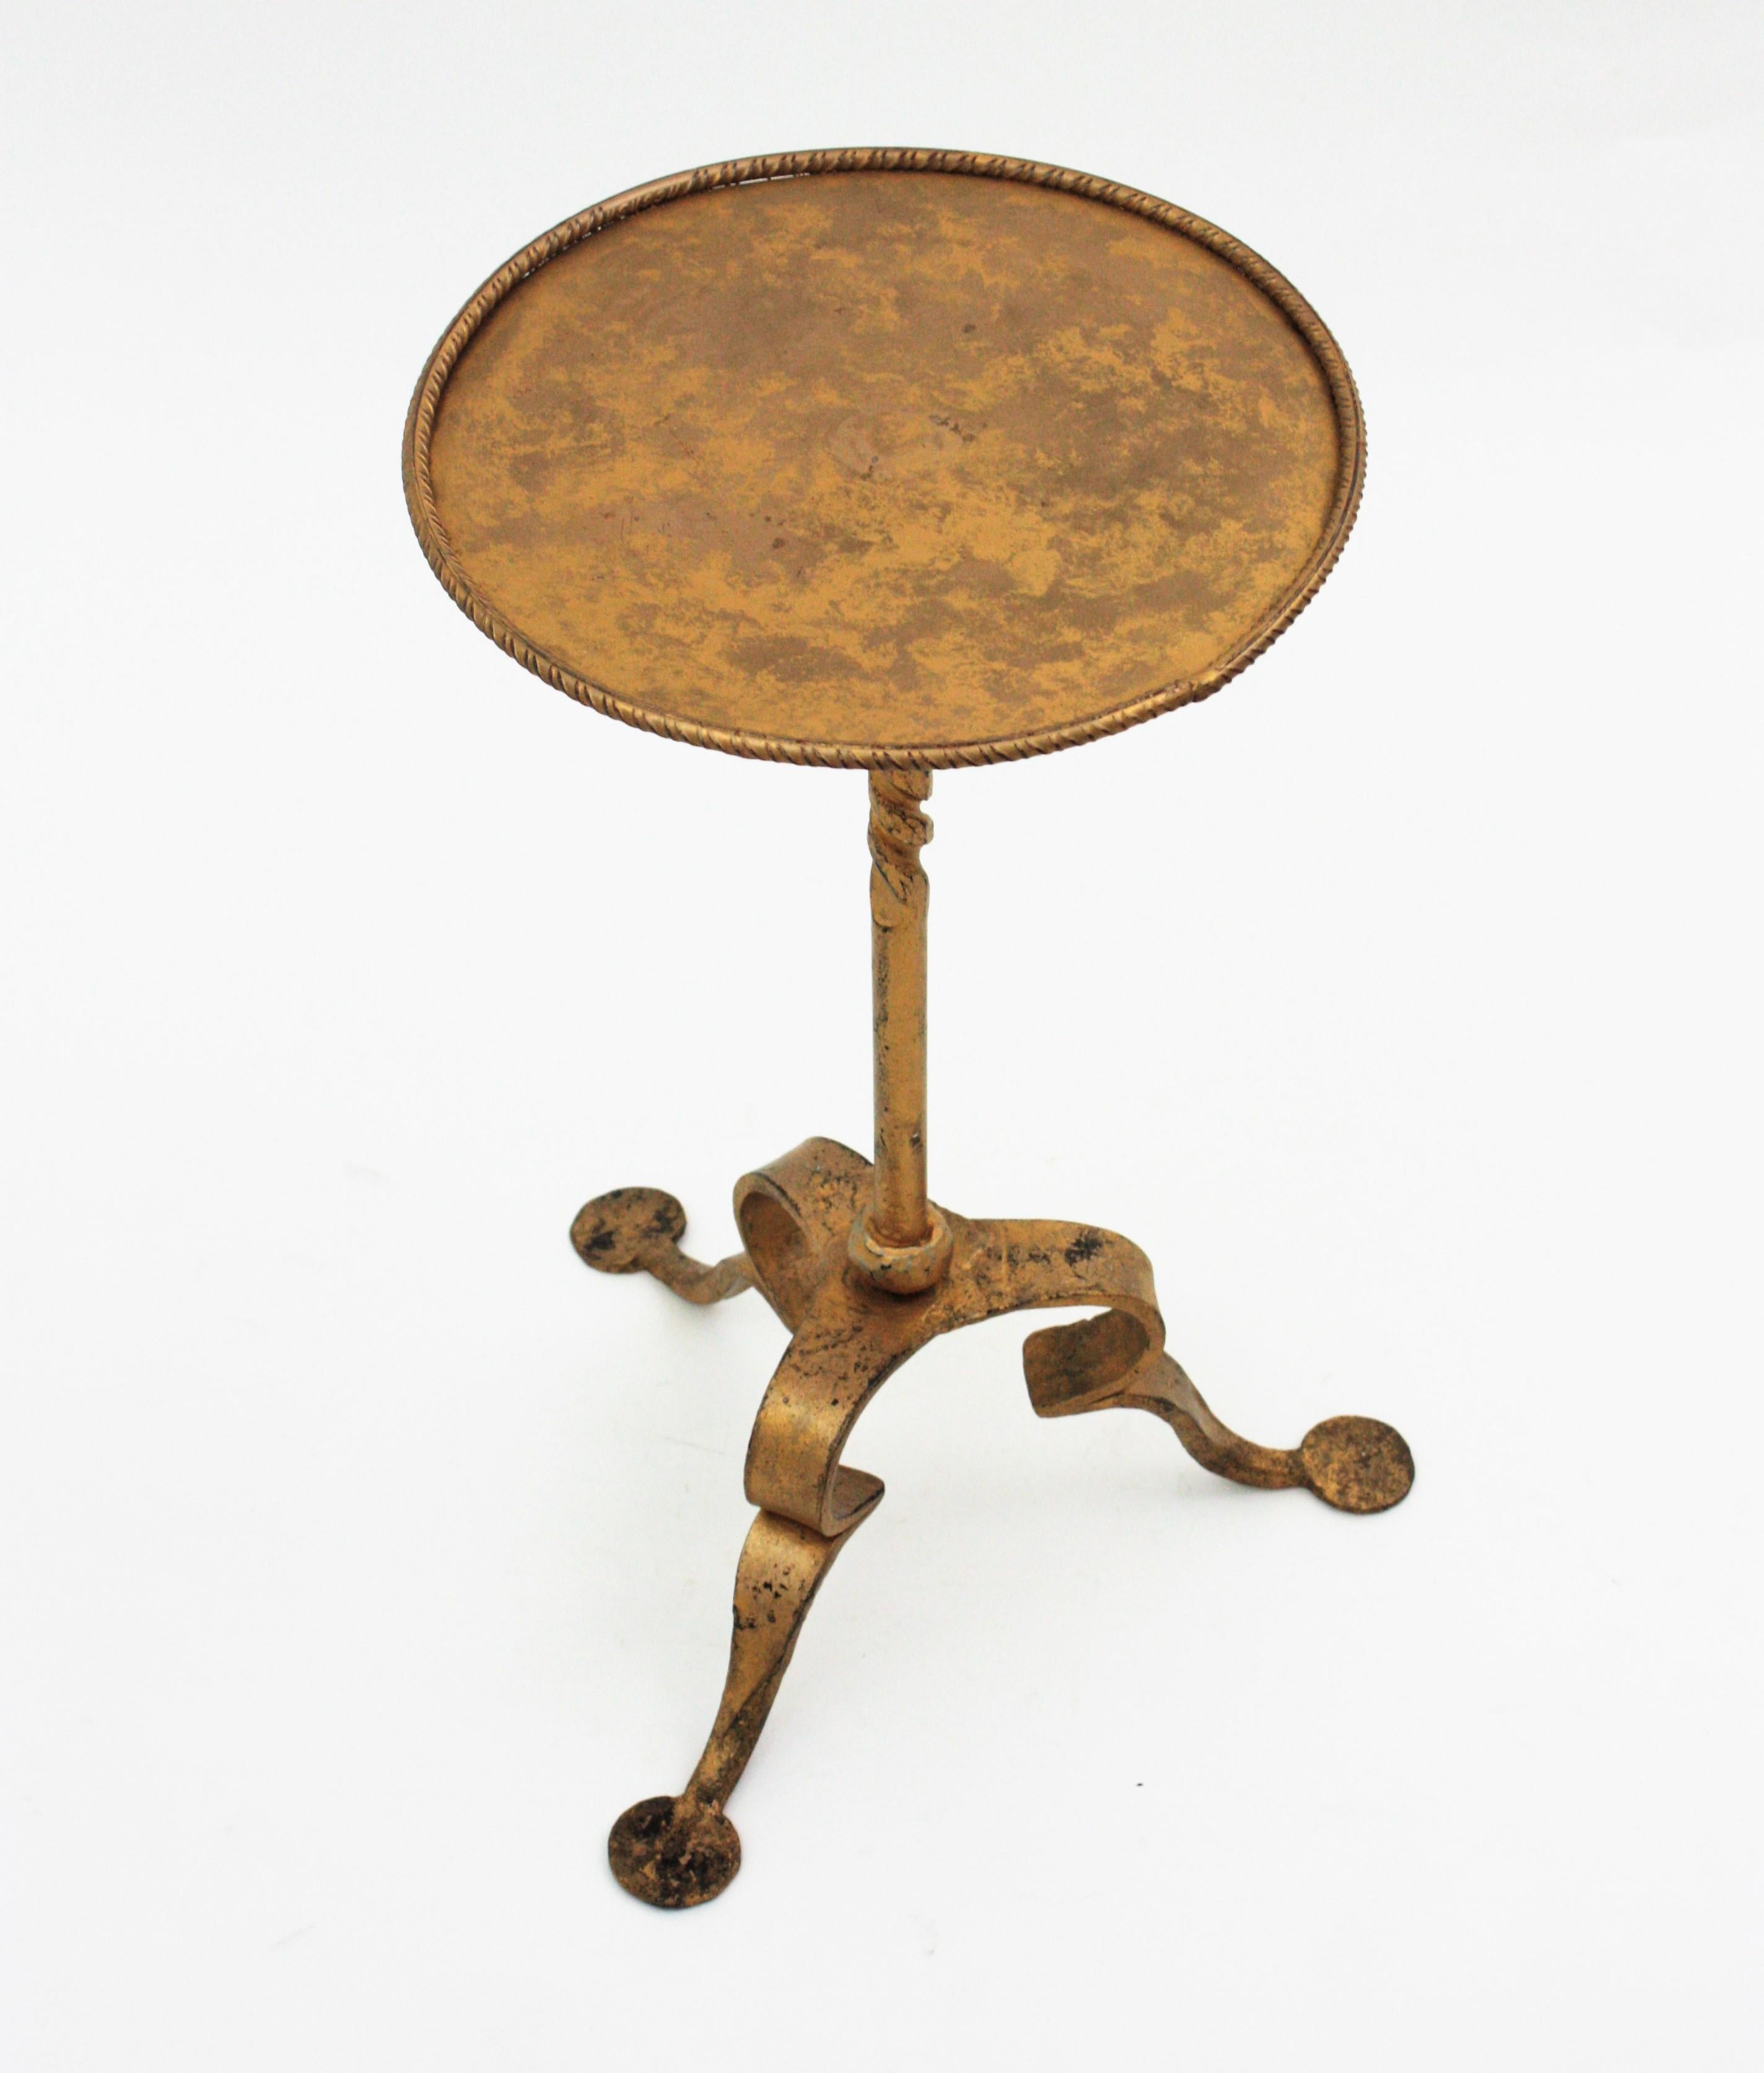 Spanish drinks table on a tripod base, Spain, 1950s
Entirely made in hand forged iron, gilt finish.
It has a clean design with Gothic style accents. The round top has a small rim, it stands on a tripod base and it has a ring decoration at the